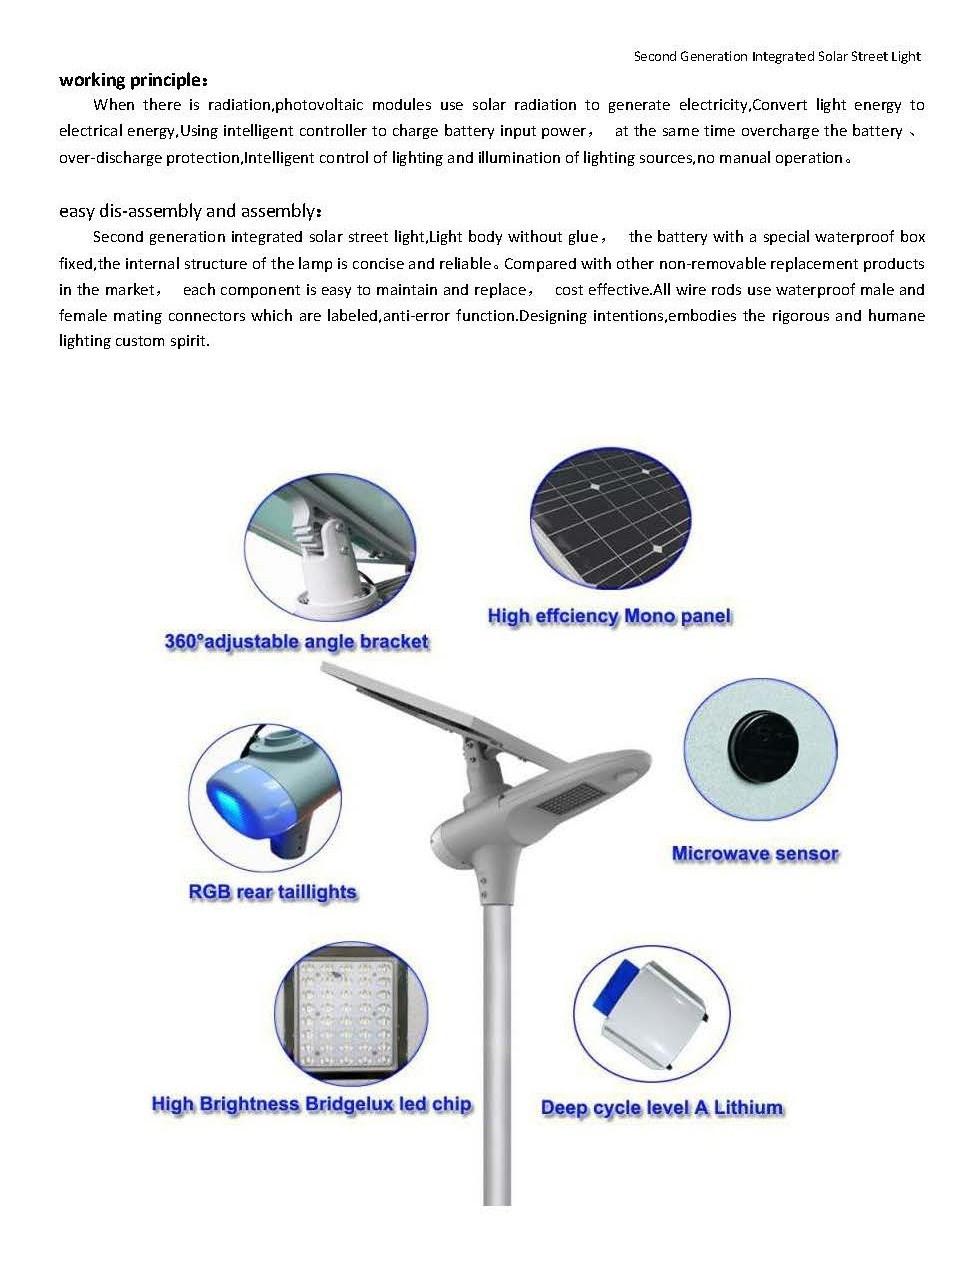 Rygh-5000lm 6m Pole 50W IP66 Lamparas Solares LiFePO4 Battery Commercial Street Waterproof Solar LED Street Light